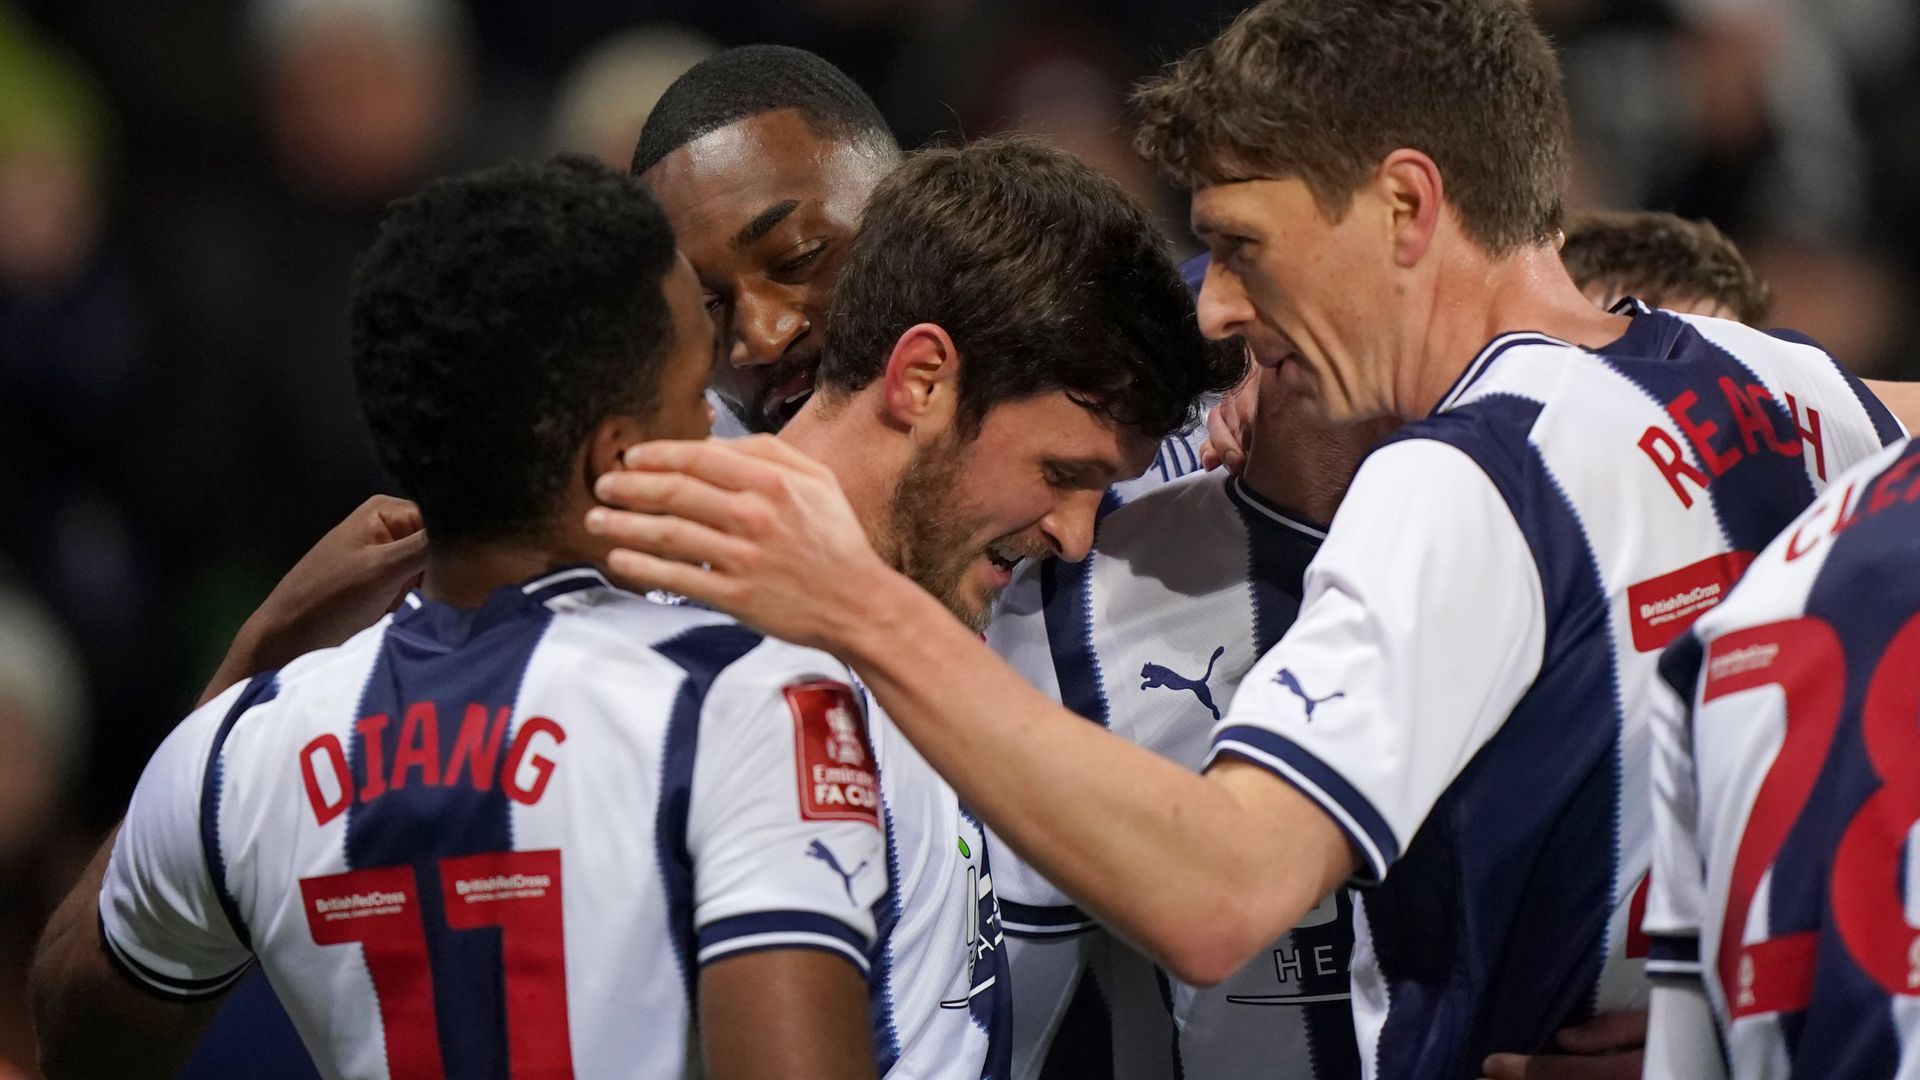 West Brom vs Coventry - latest score